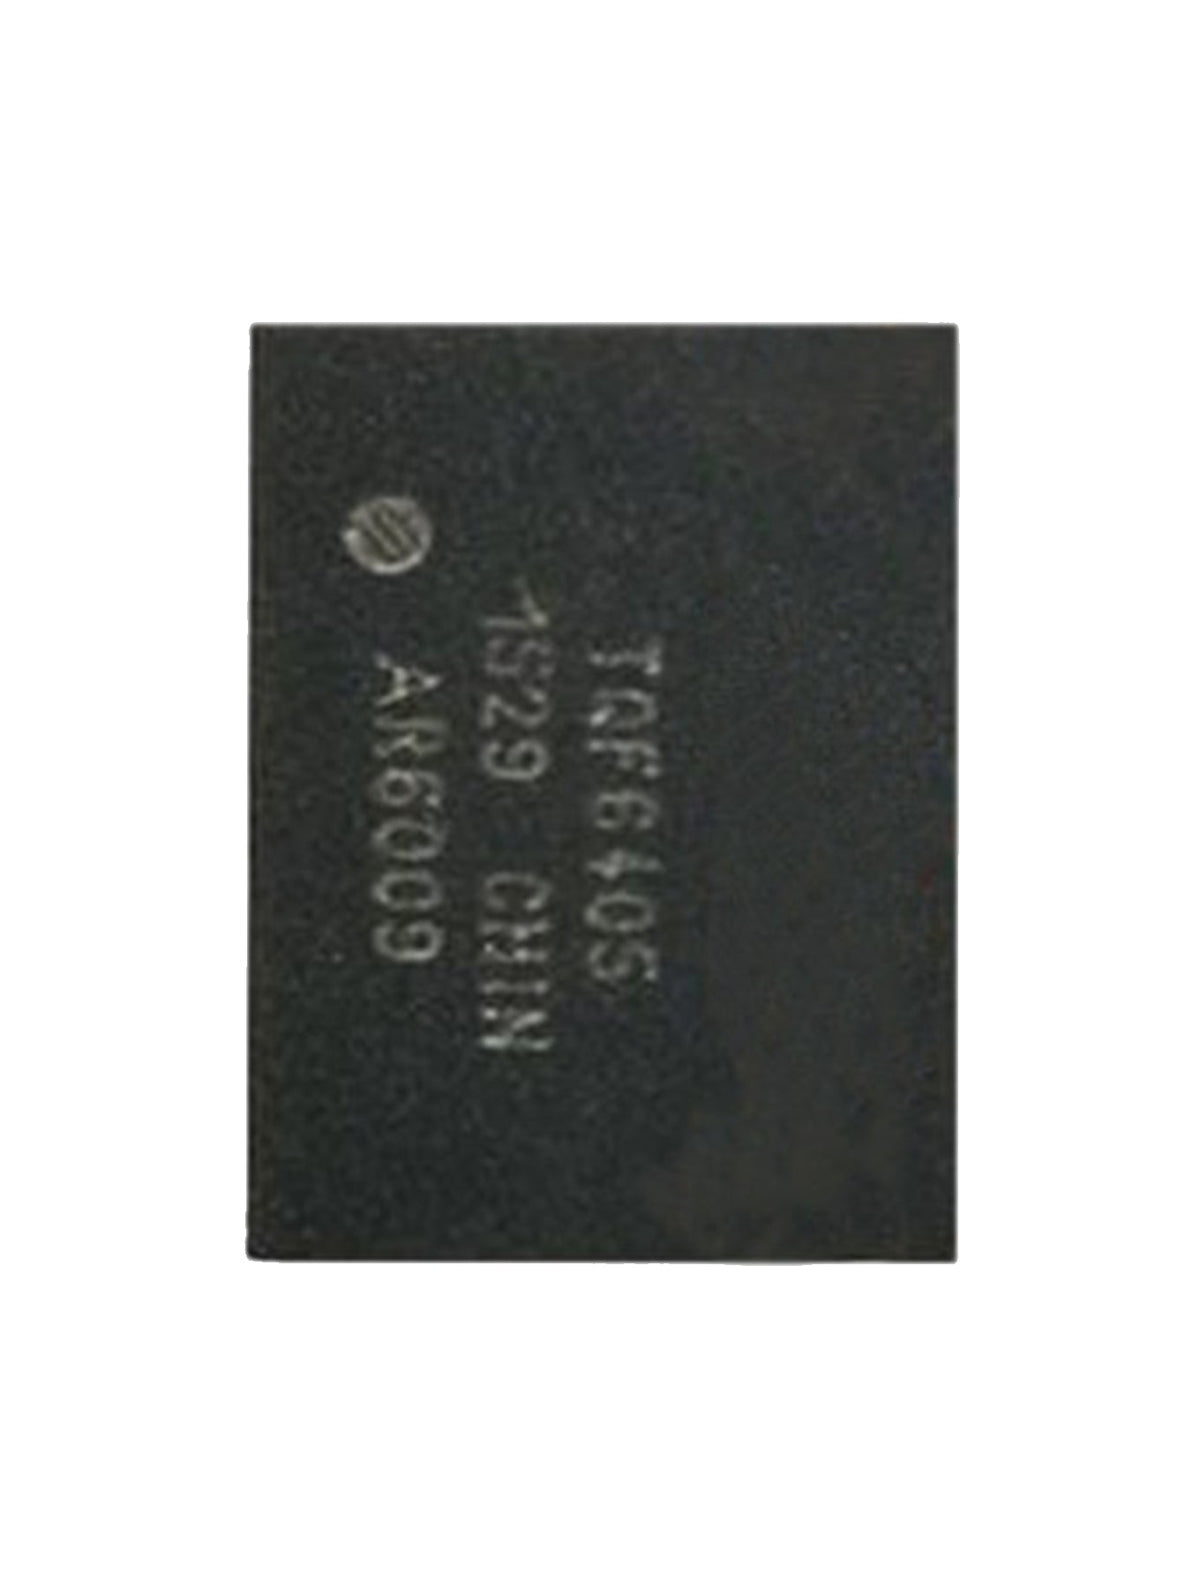 SIGNAL IC COMPATIBLE WITH IPHONE 6S / 6S PLUS (UHBPA_RF: TQF6405: 55 PINS)